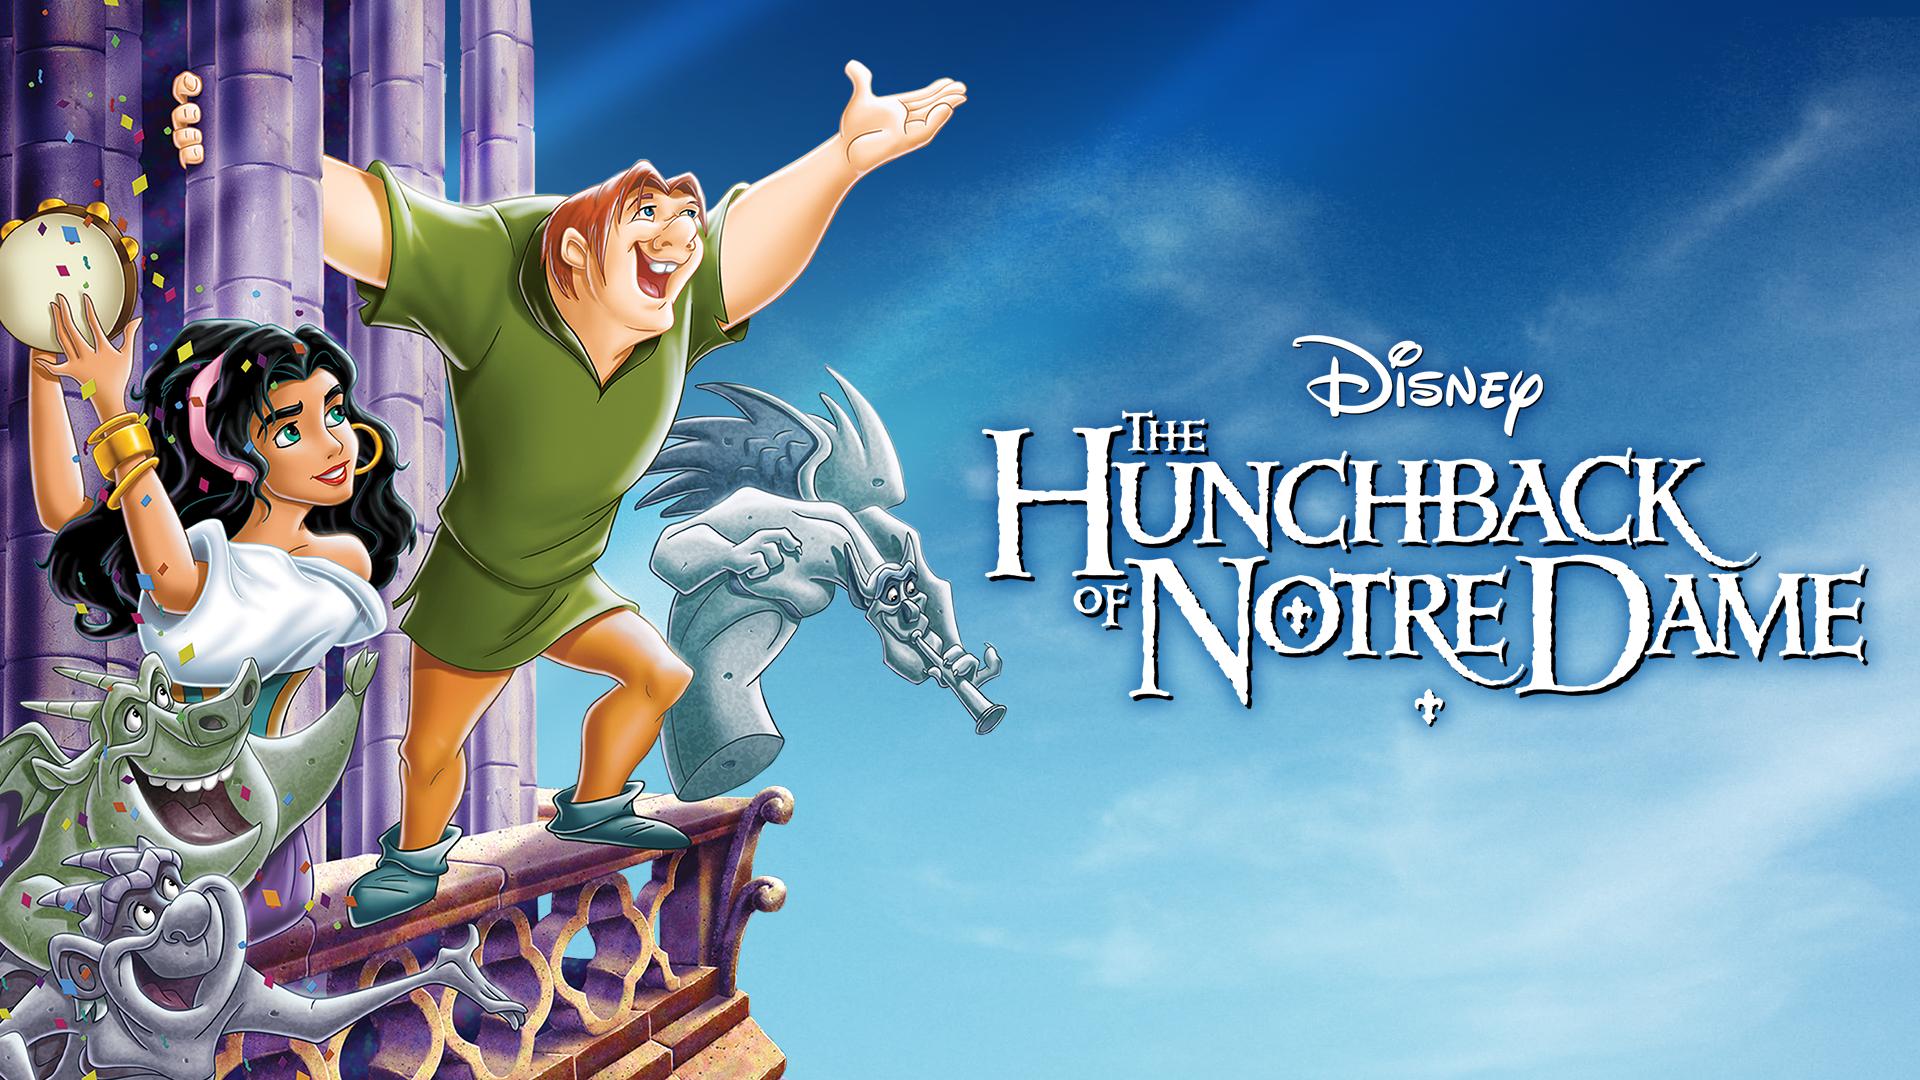 20 Weeks of Disney Animation 'The Hunchback of Notre Dame' The